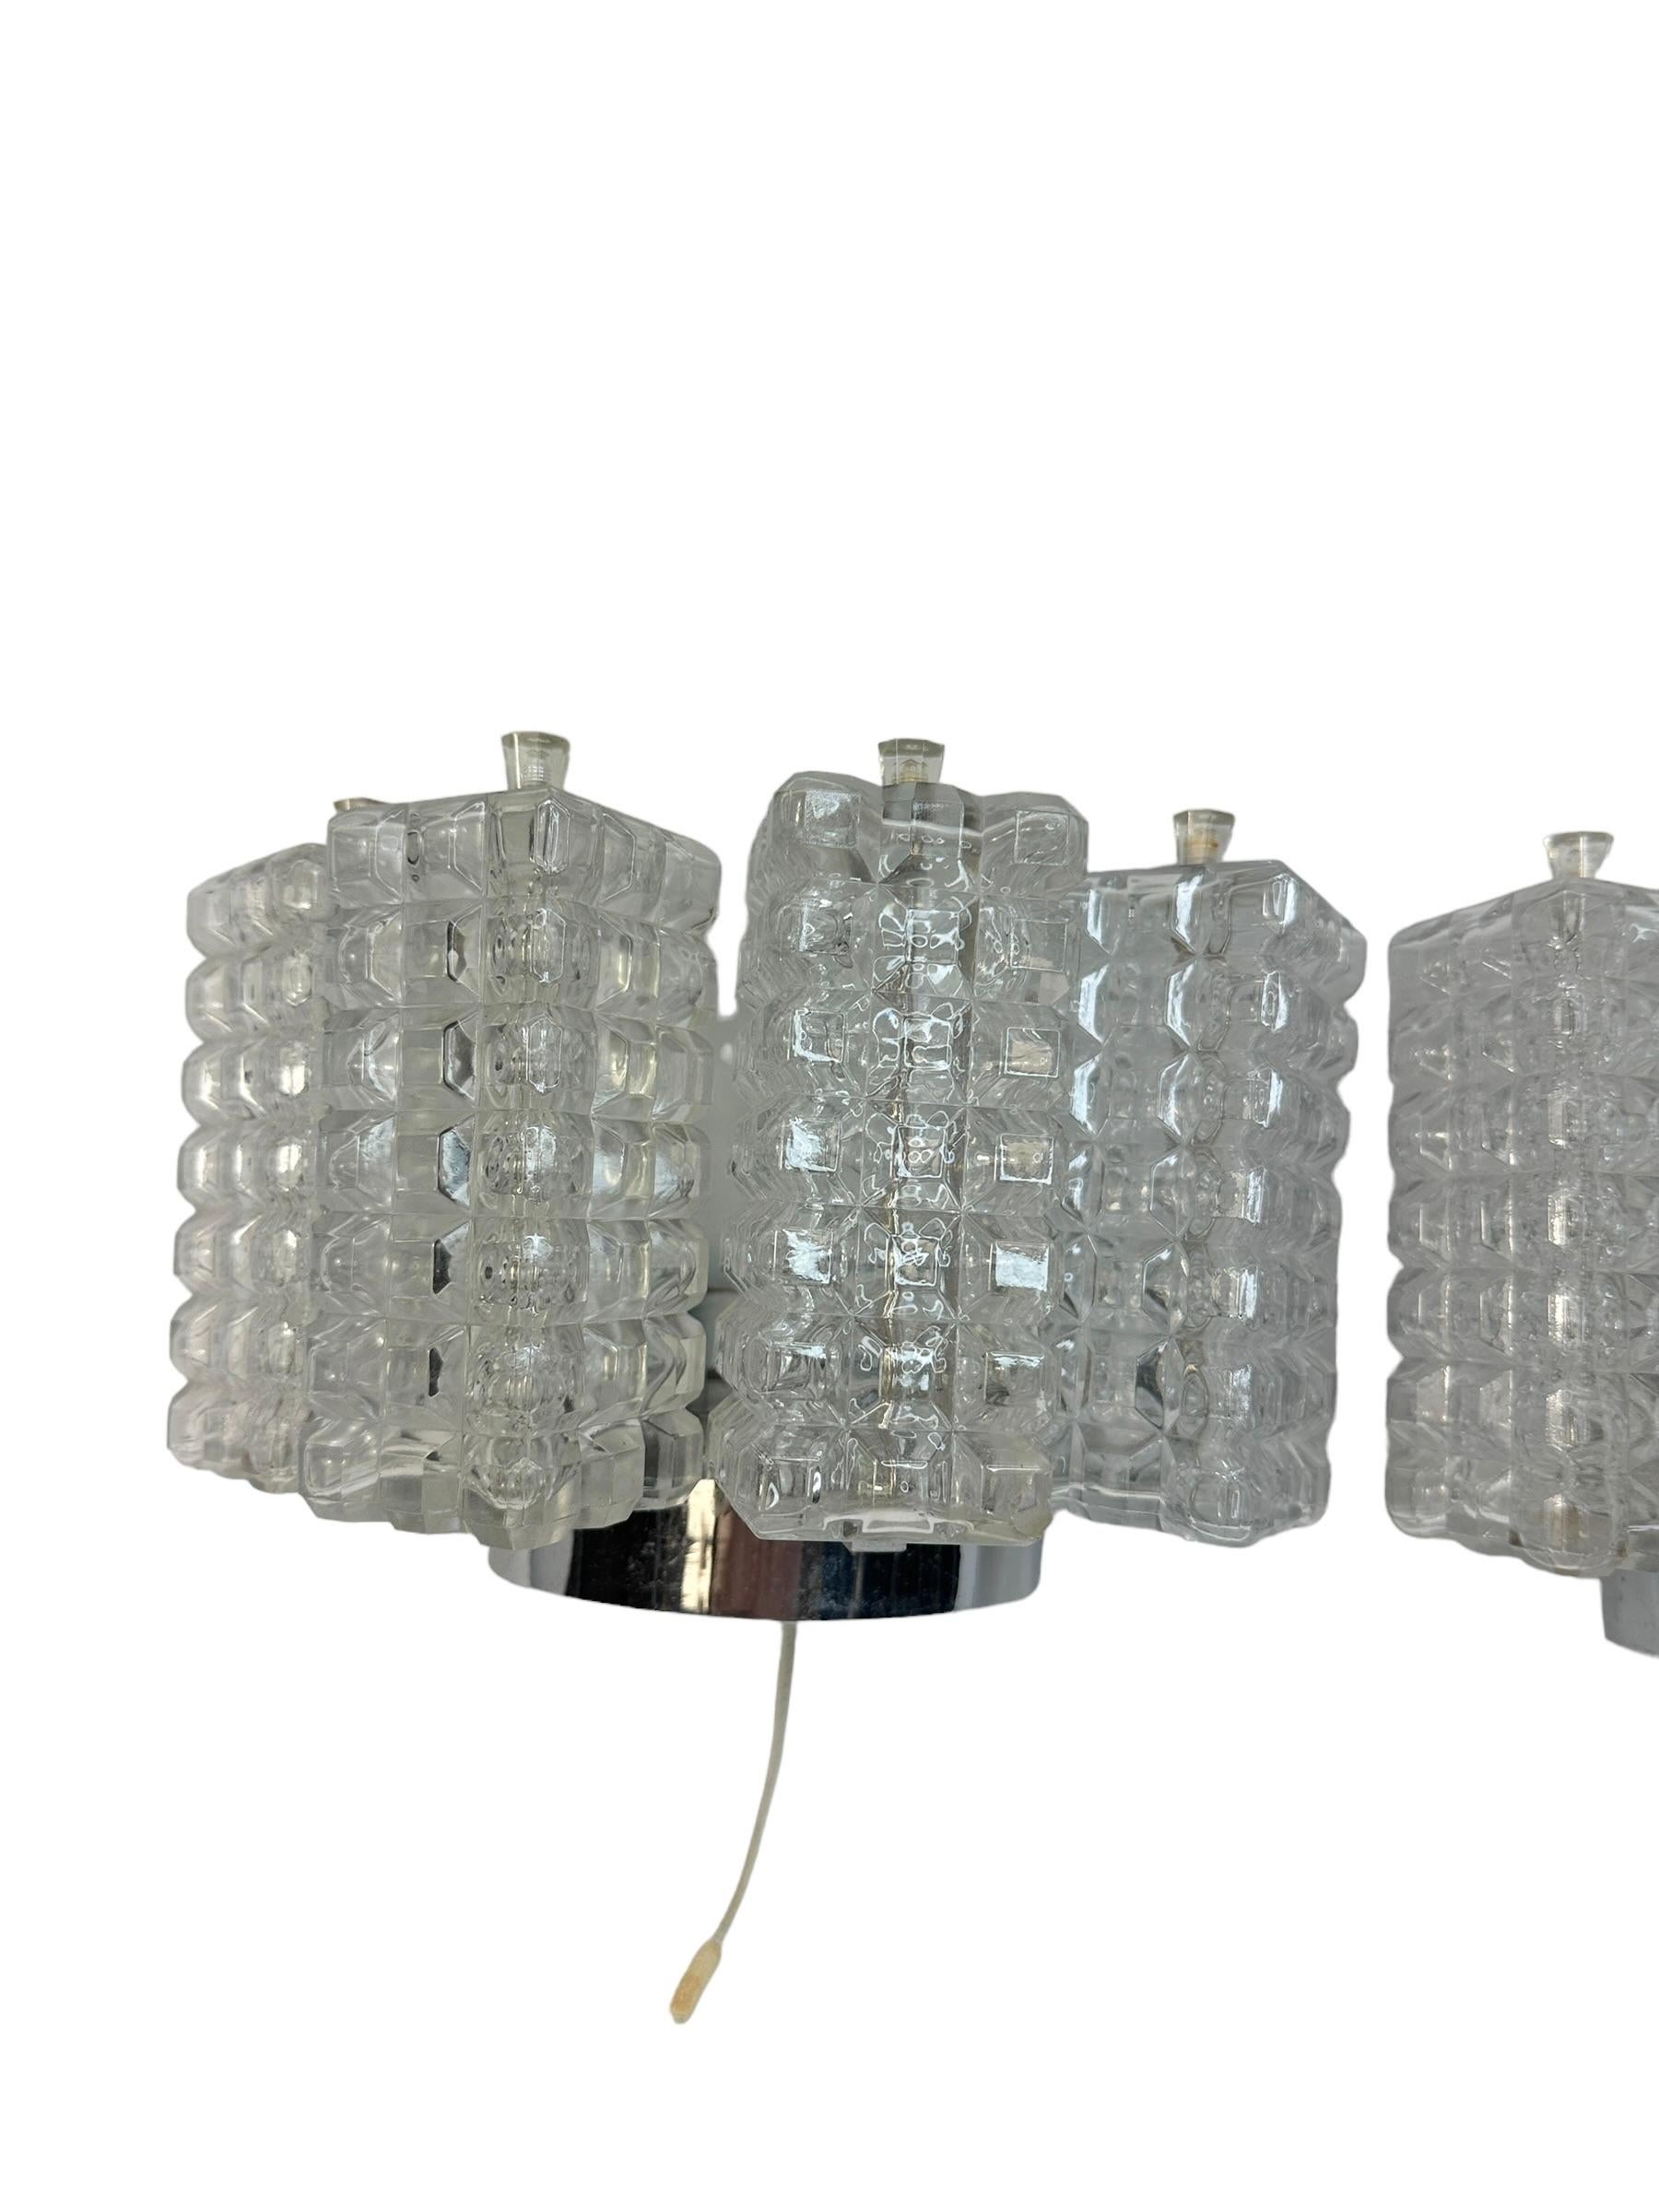 A beautiful pair of Austrian sconces by Austrolux, Vienna, manufactured in the mid-century, circa 1960s (late 1960s or early 1970s). Each lamp consists of a silver-colored metal frame containing chrome-plated or nickel-plated elements and large